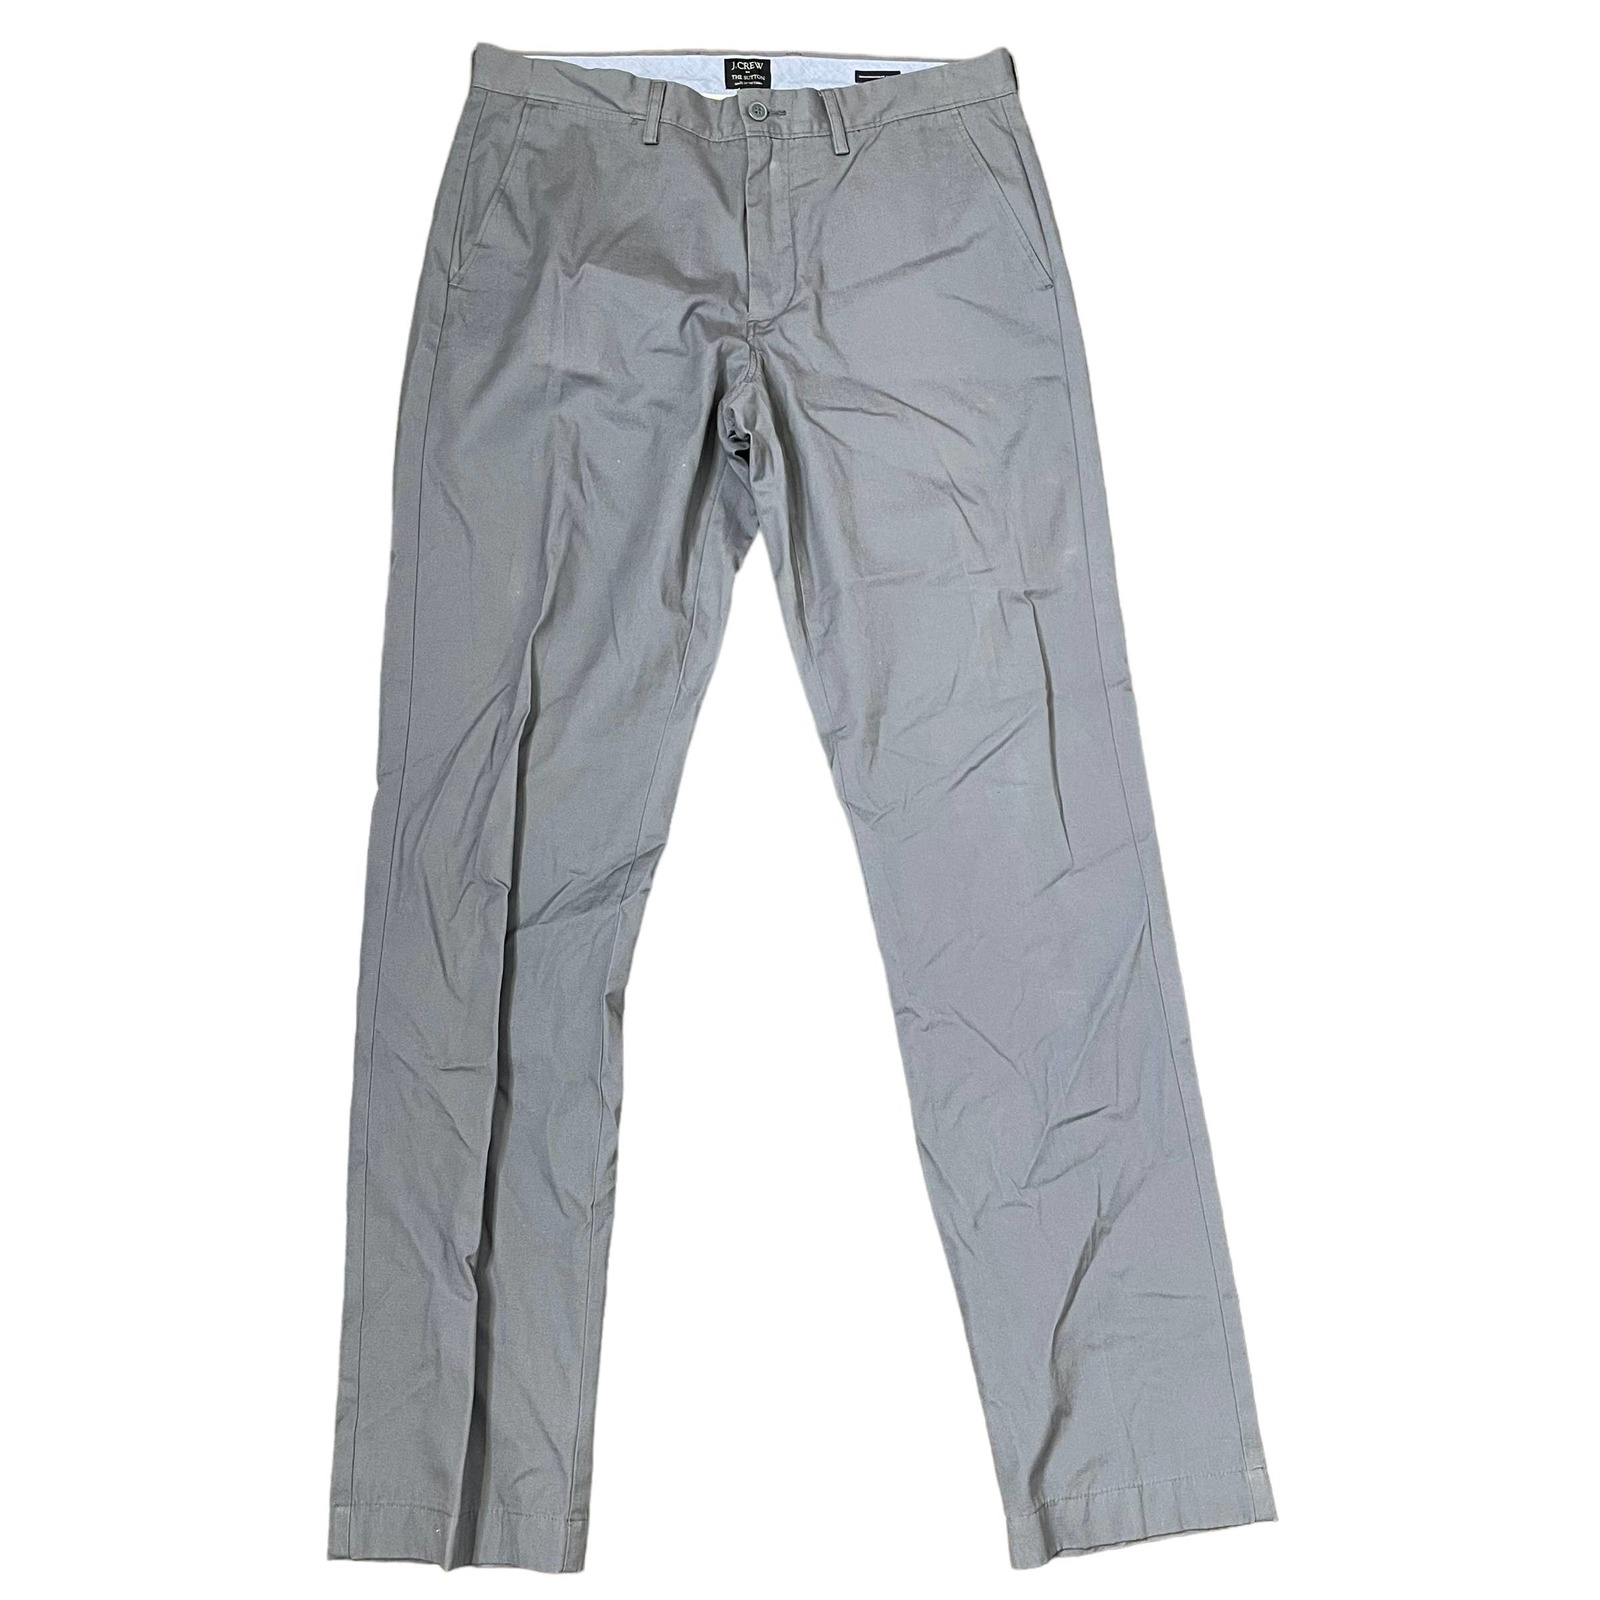 Primary image for J.Crew Sutton Summerweight Straight Chino Pants 100% Cotton Men 32x34 Gray